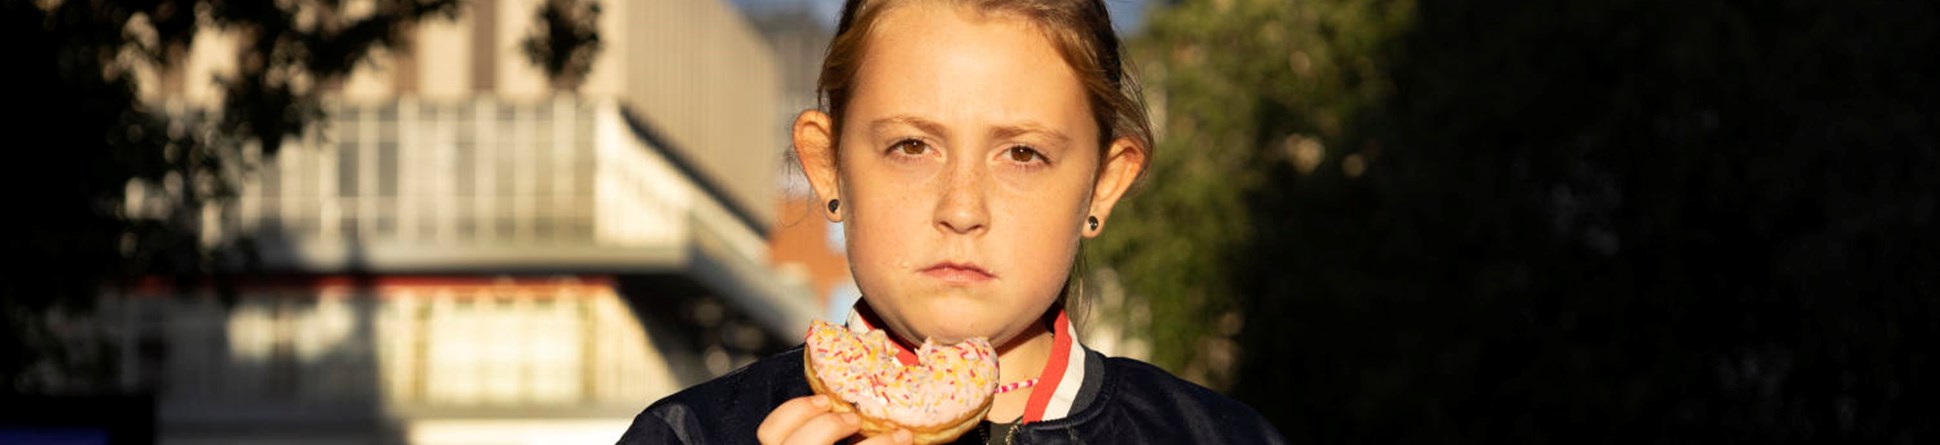 Portrait of a girl eating a donut on the street